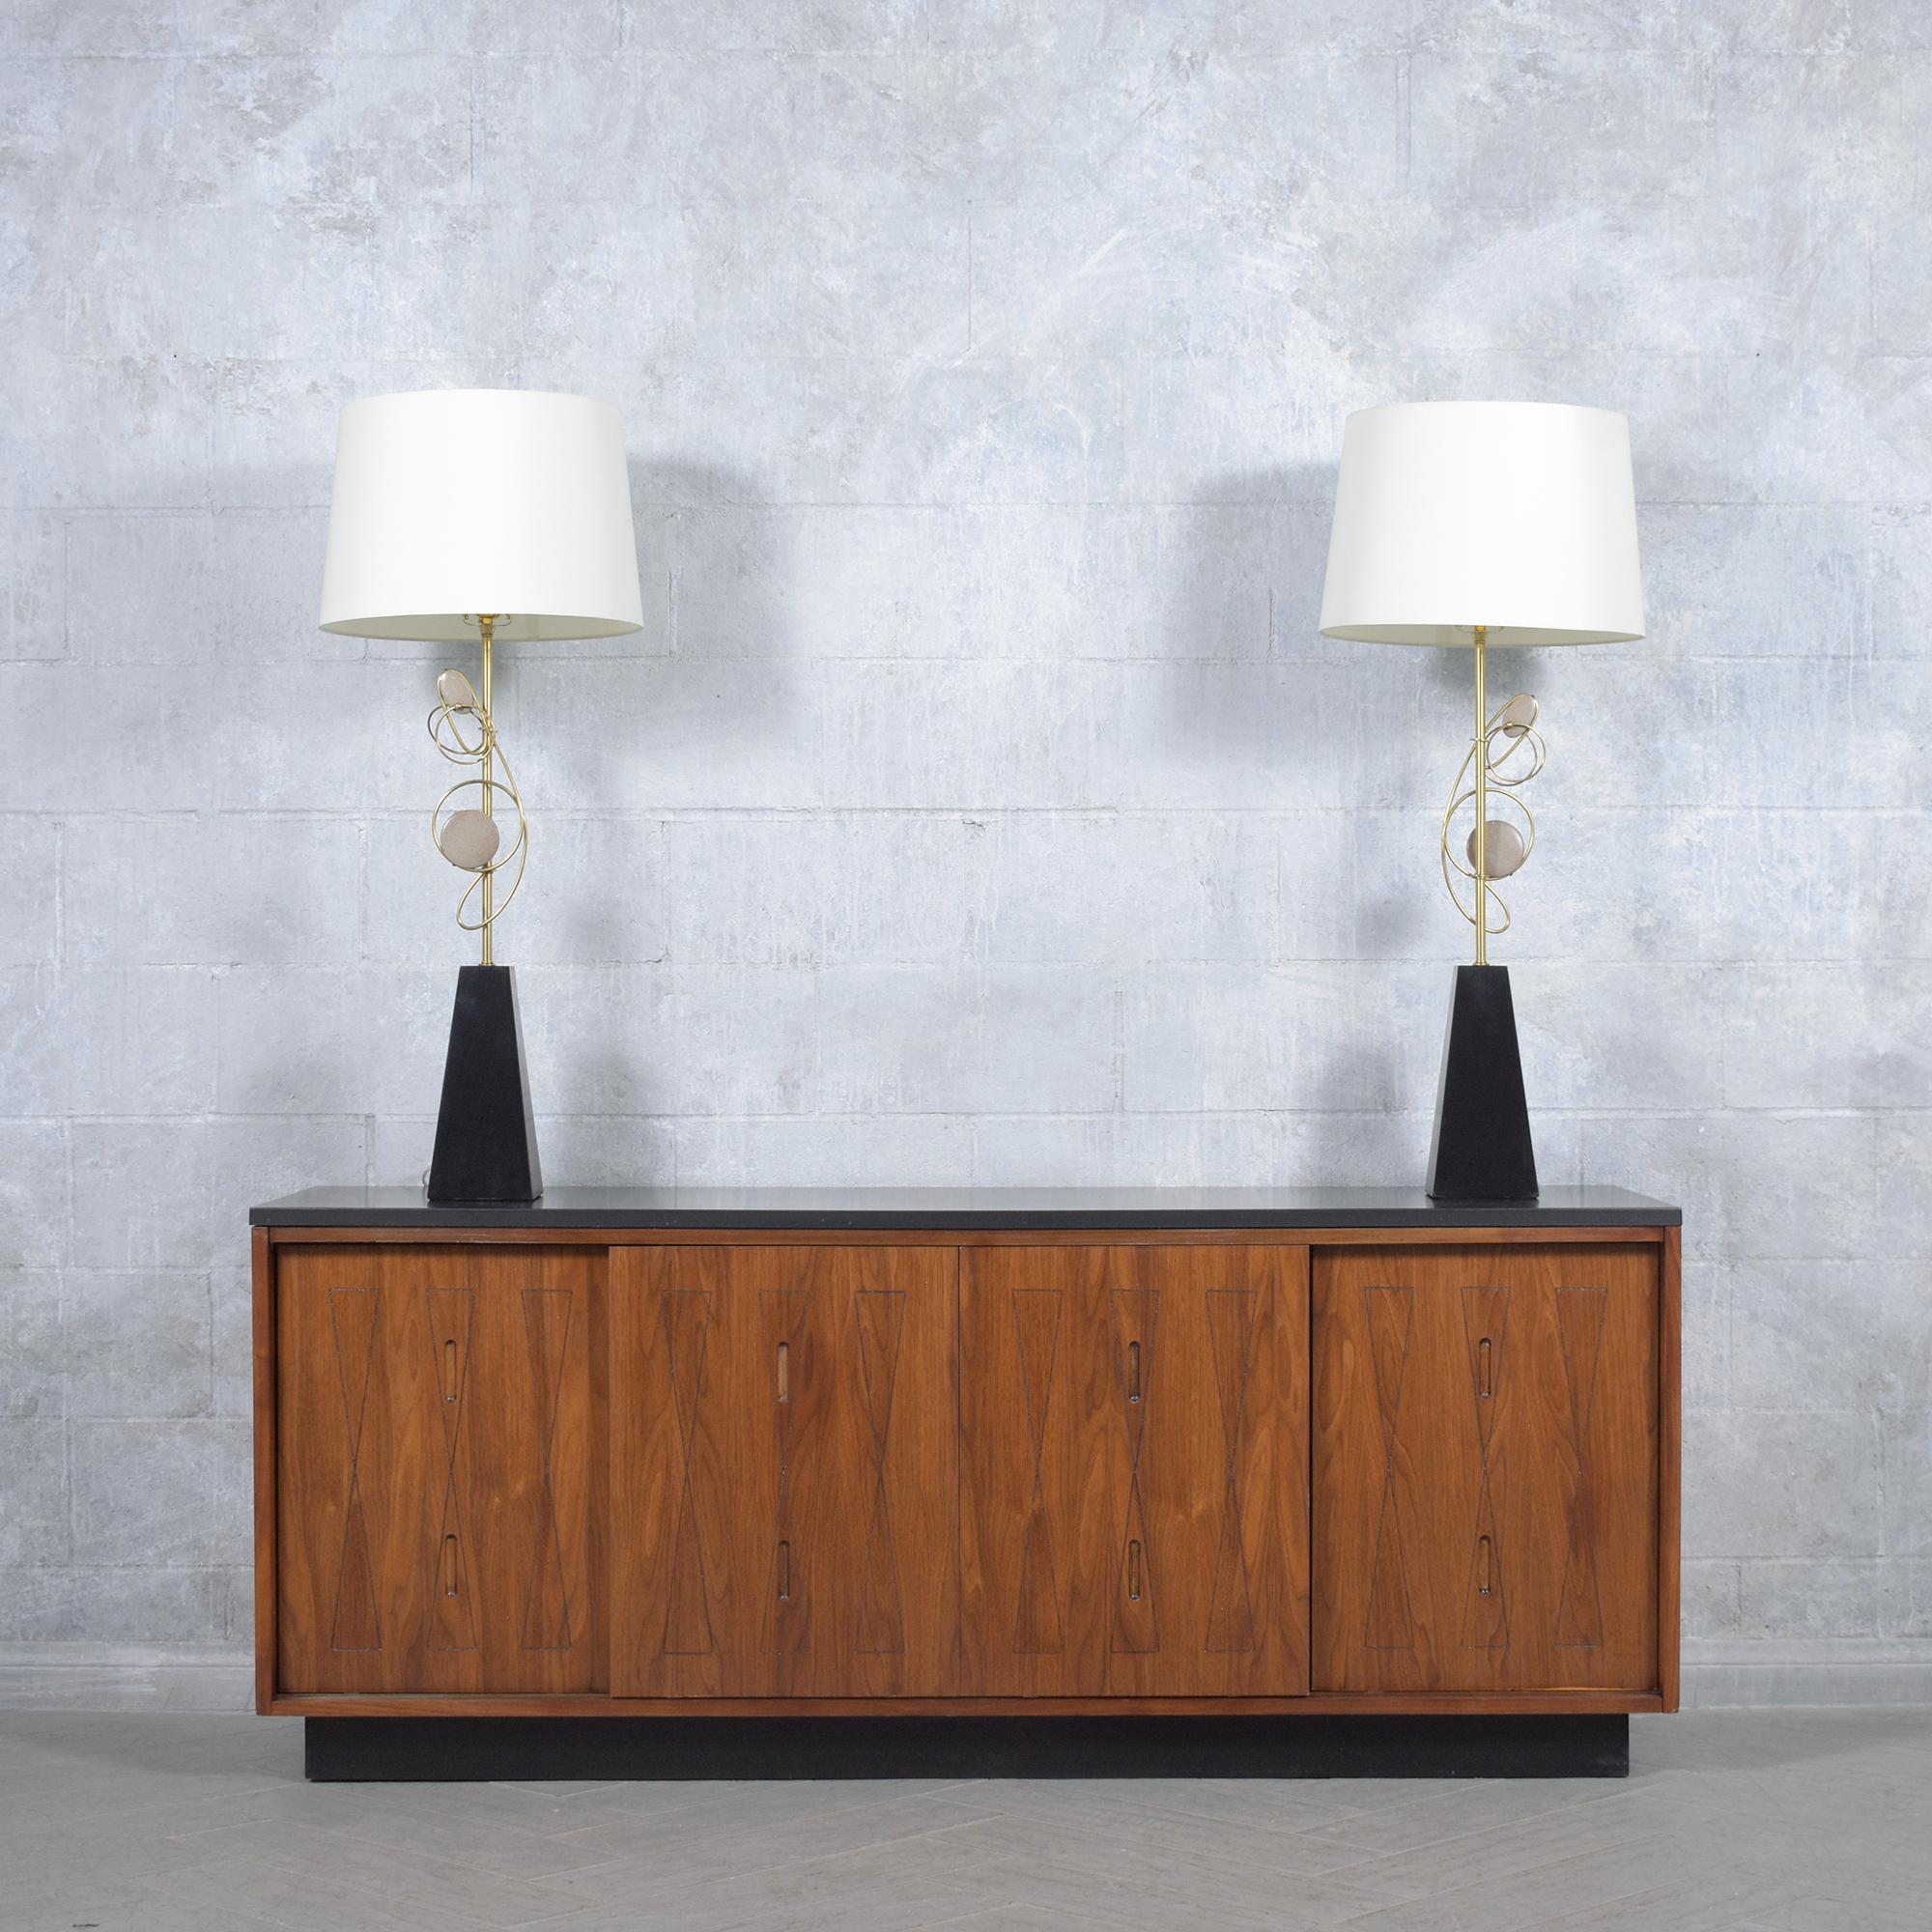 1960s Mid-Century Modern Wood & Brass Table Lamps with Fabric Shades 1